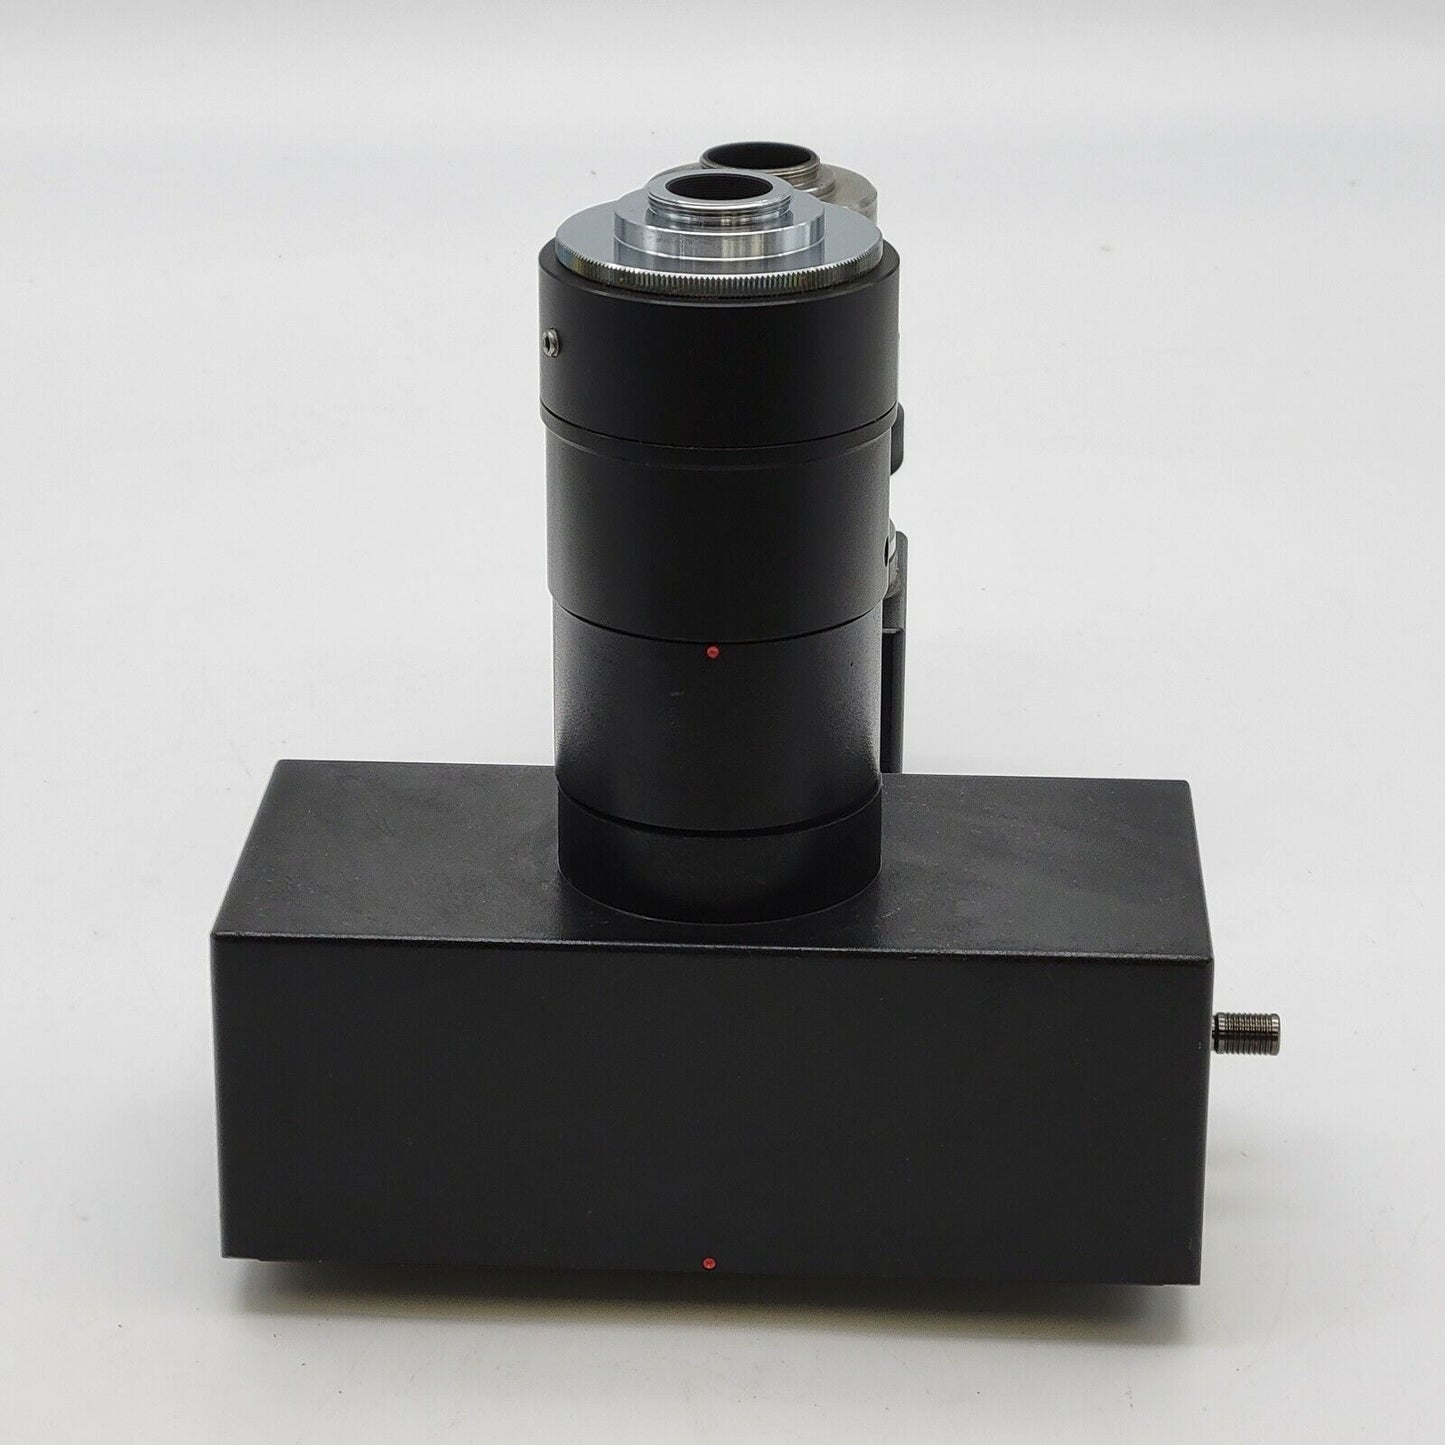 Olympus Microscope U-DPT-2 Dual Photo Port with Camera Adapters for BX Series - microscopemarketplace